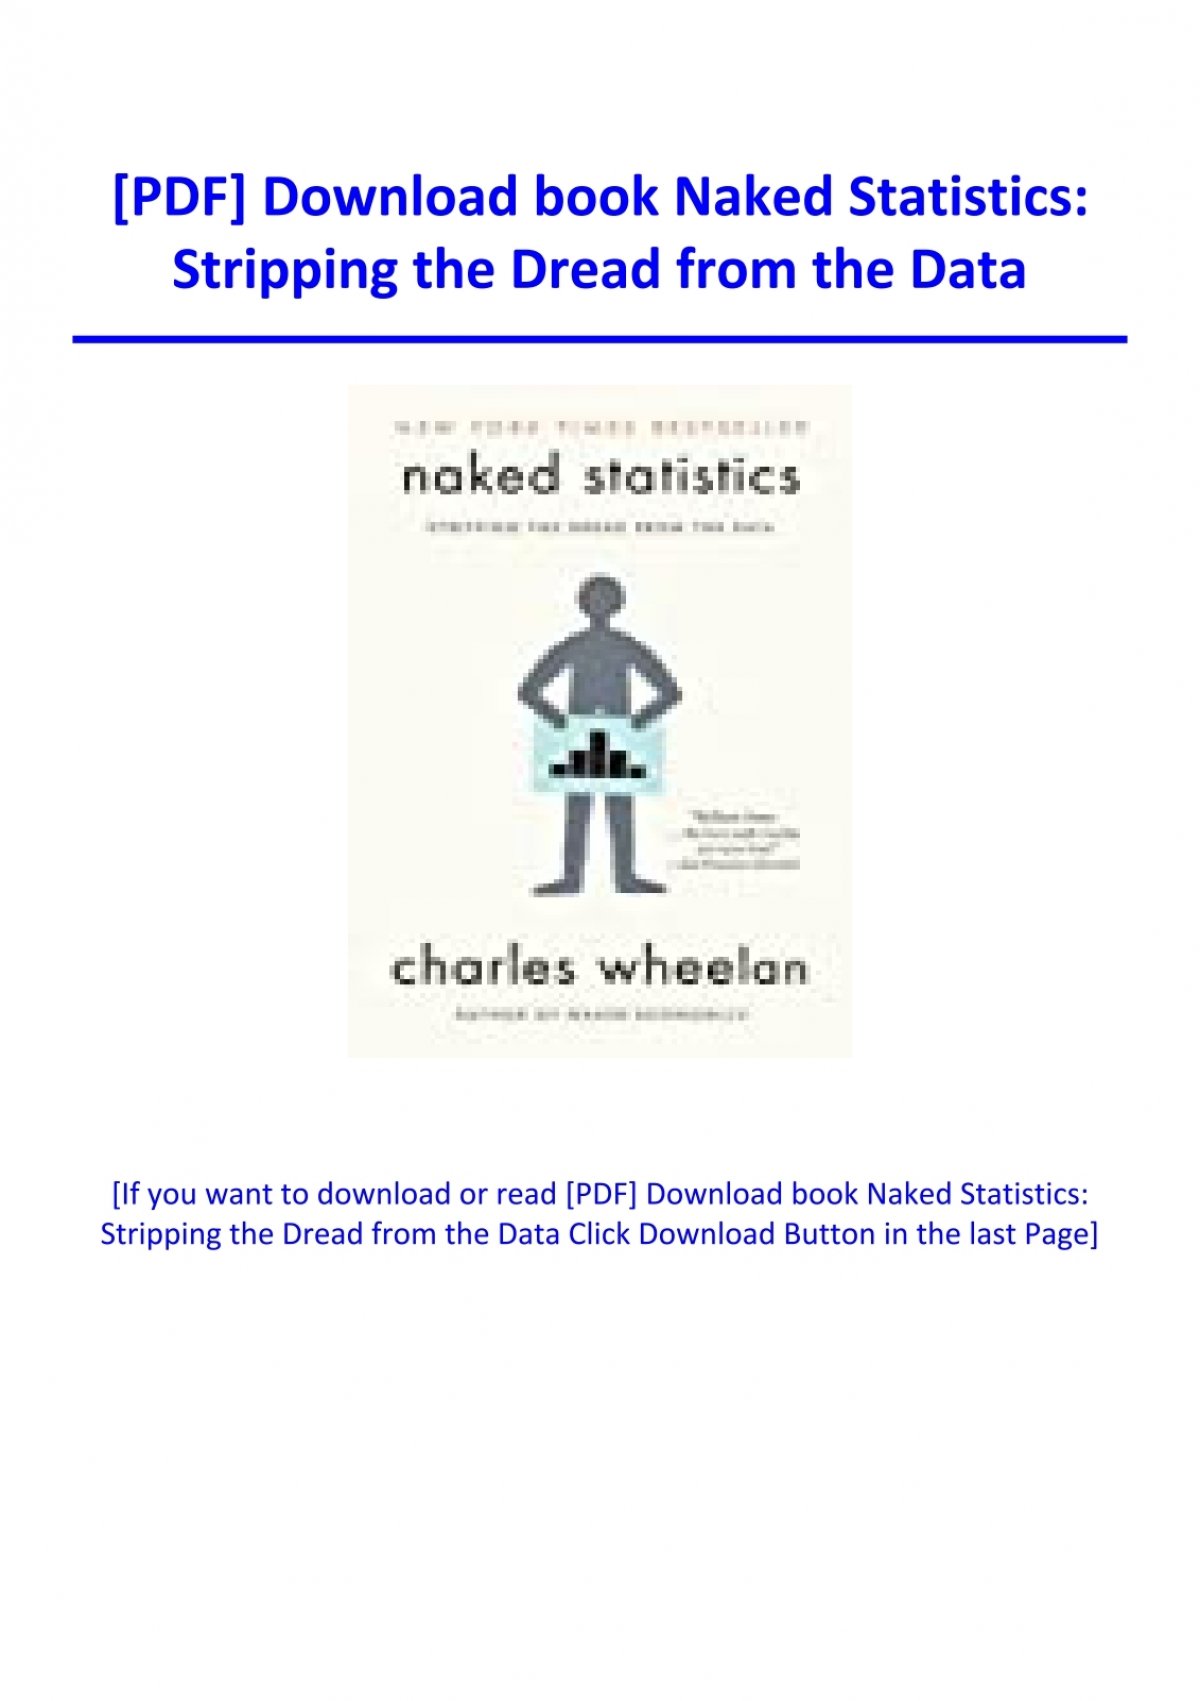 Pdf Download Book Naked Statistics Stripping The Dread From The Data